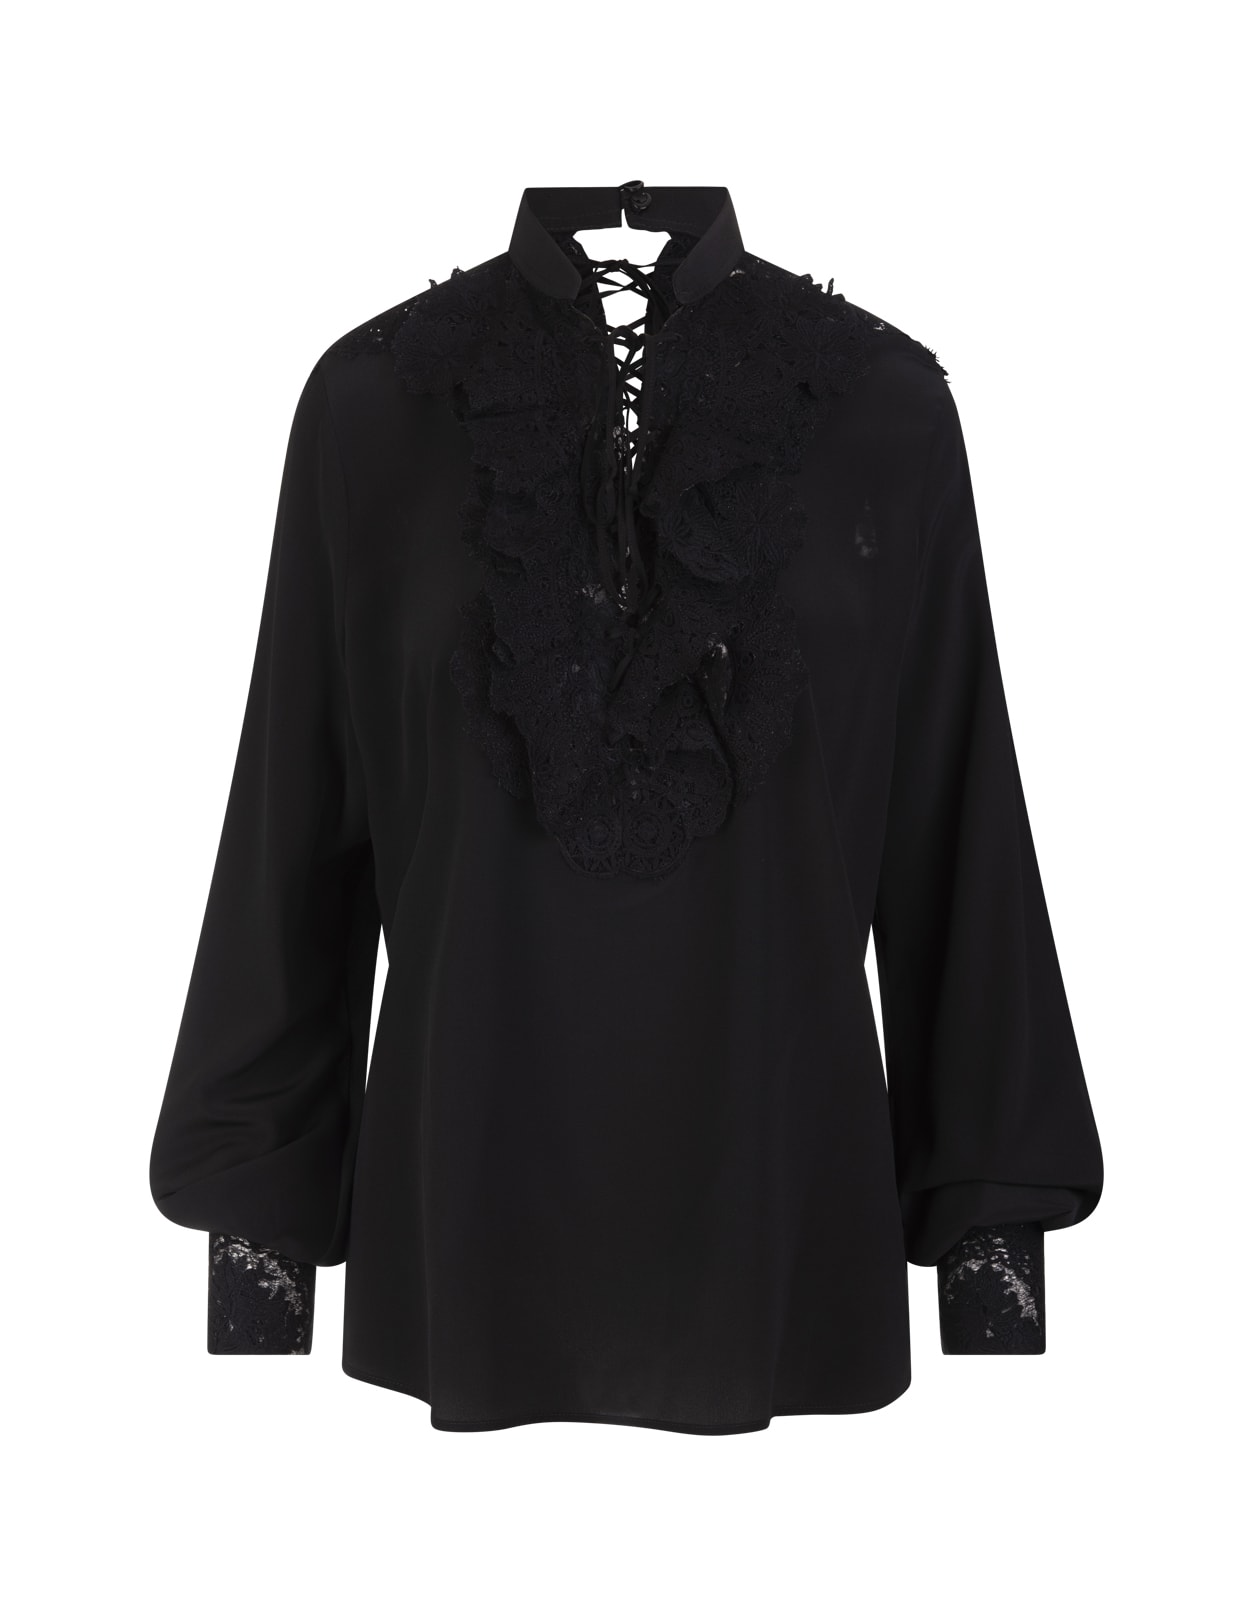 Ermanno Scervino Black Silk Shirt With Lace